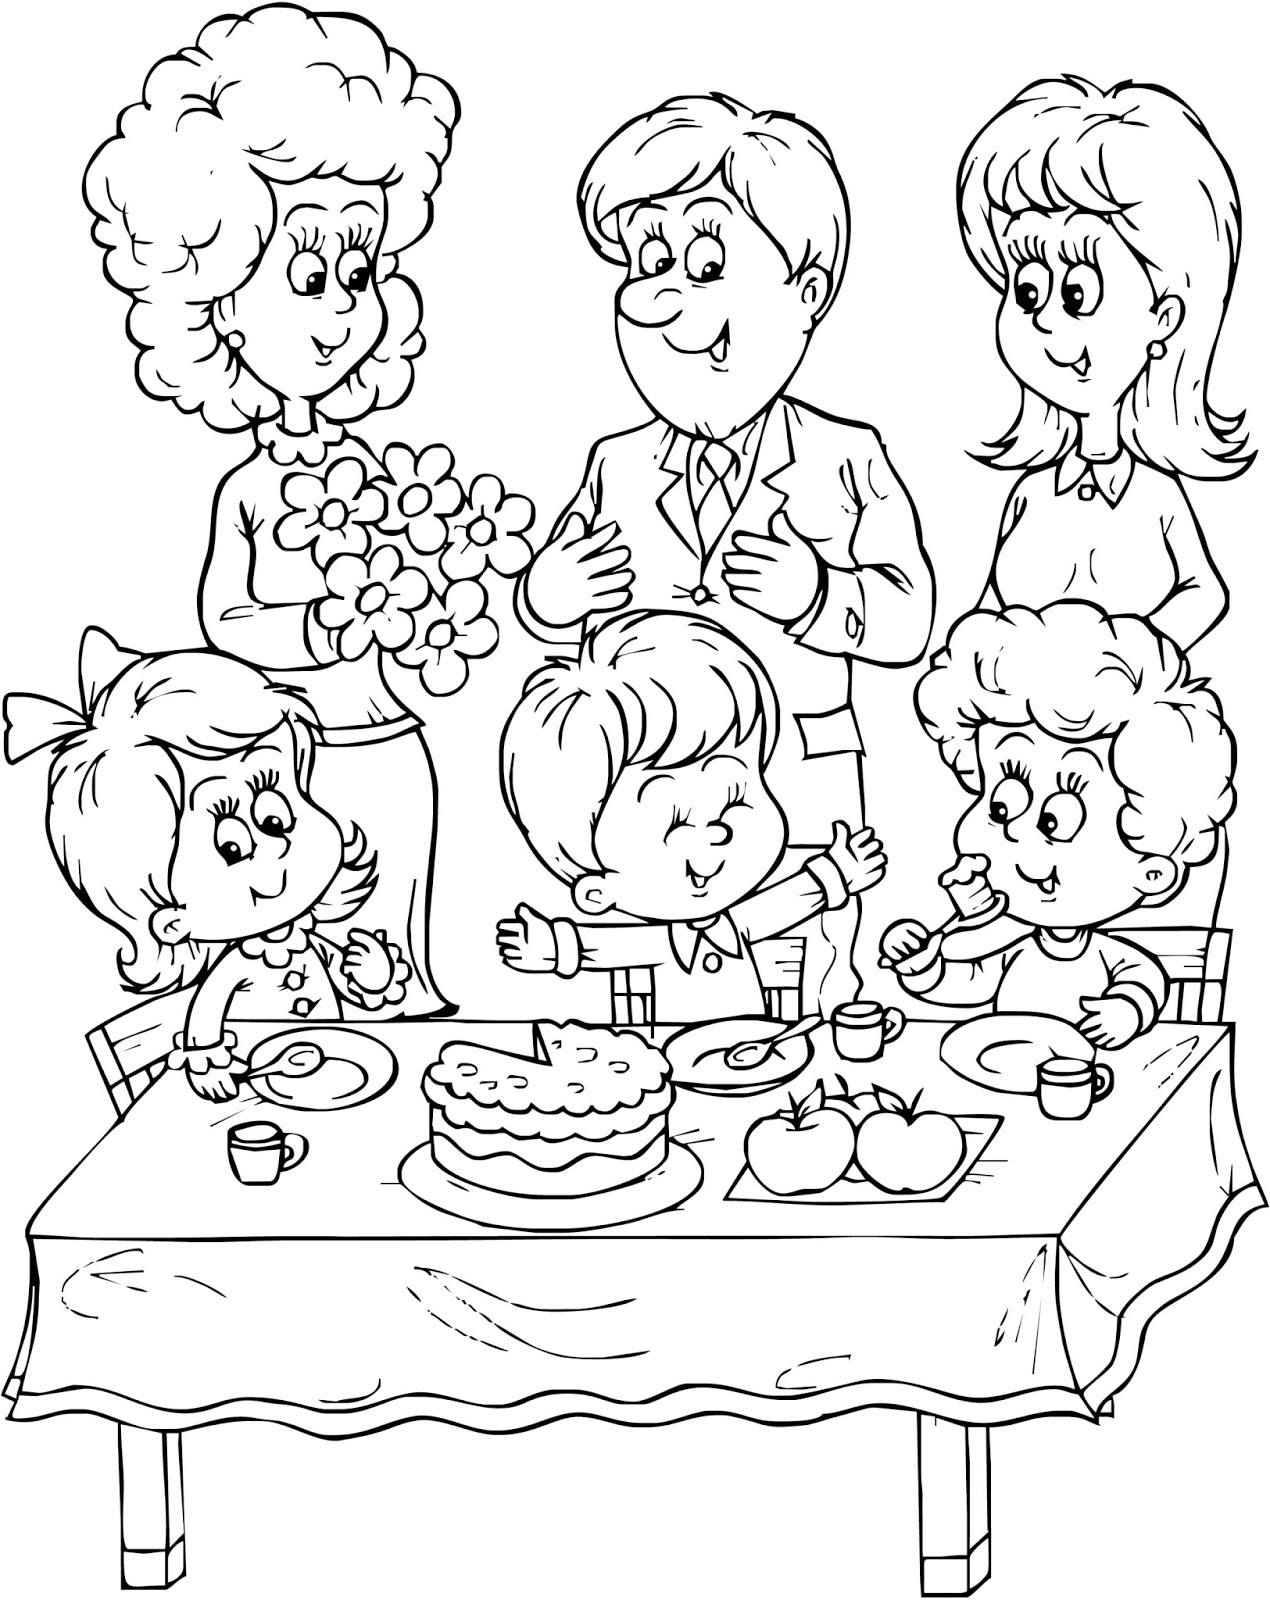 Family Reunion Coloring Pages at GetColorings.com | Free printable